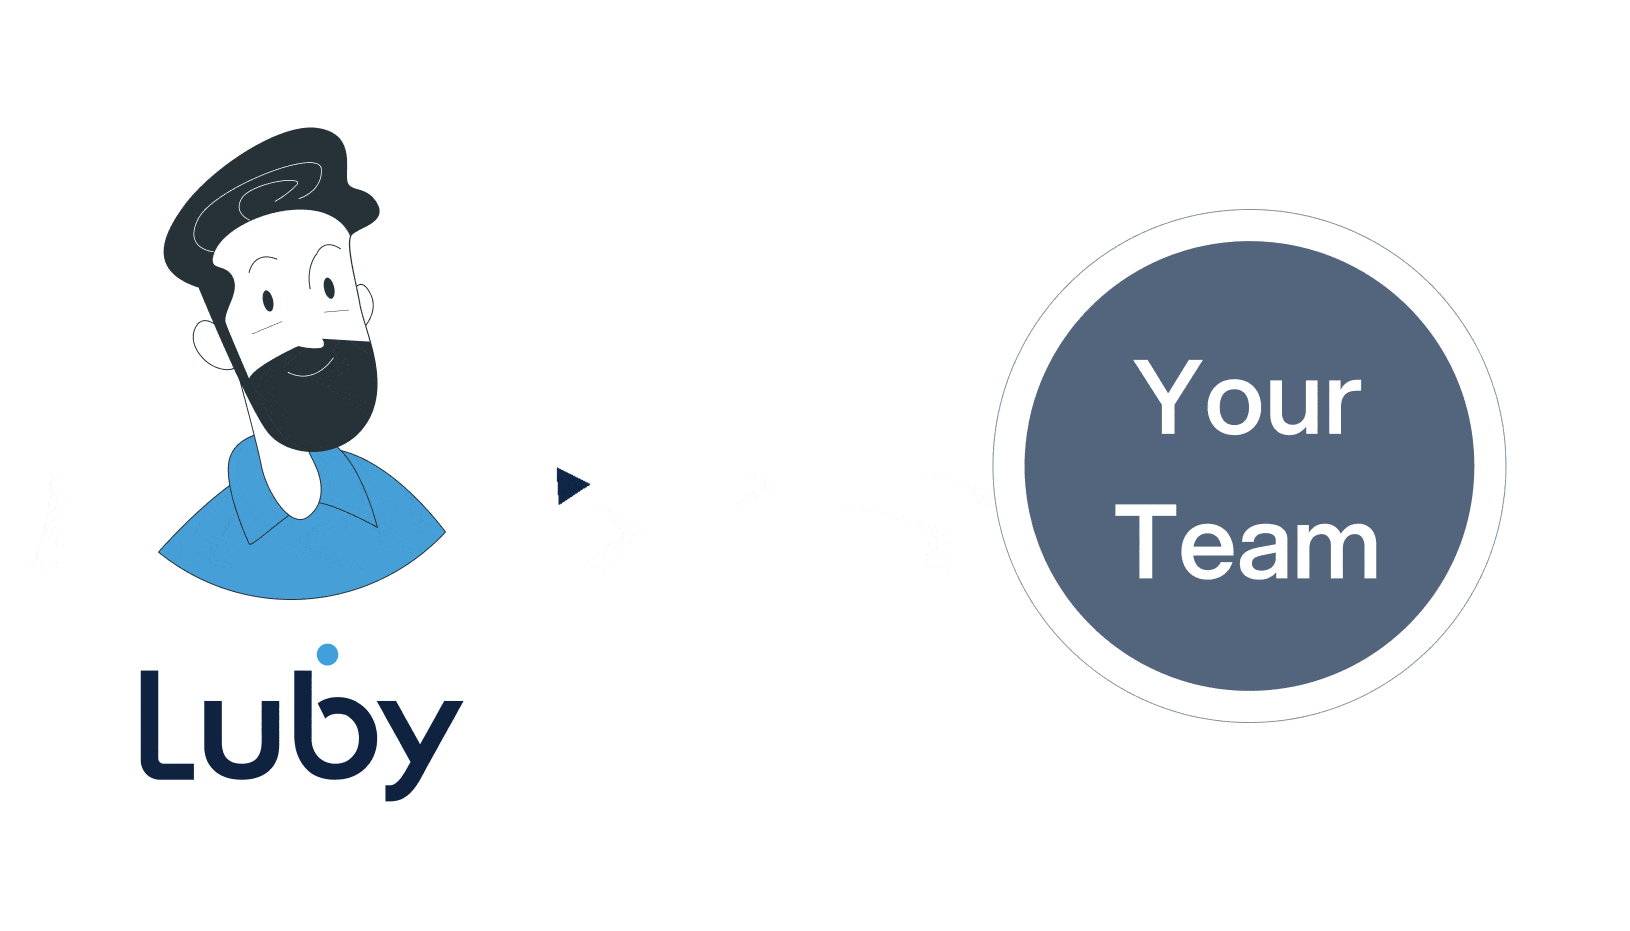 Software Development Outsourcing Luby Your Team.